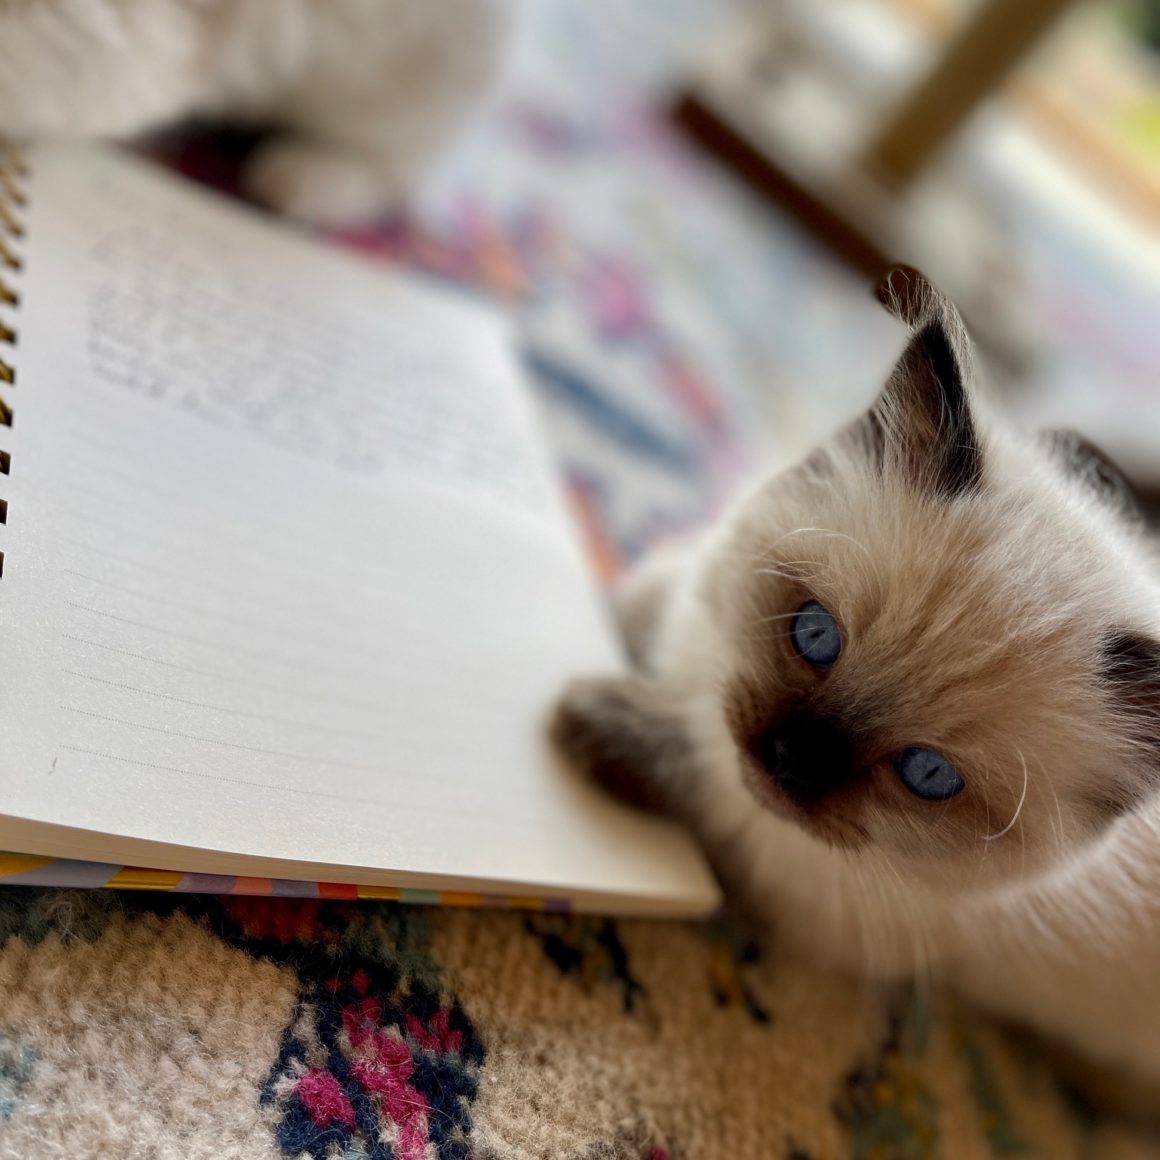 white ragdoll kitten with dark face markings sitting on carpet, resting paws on notebook